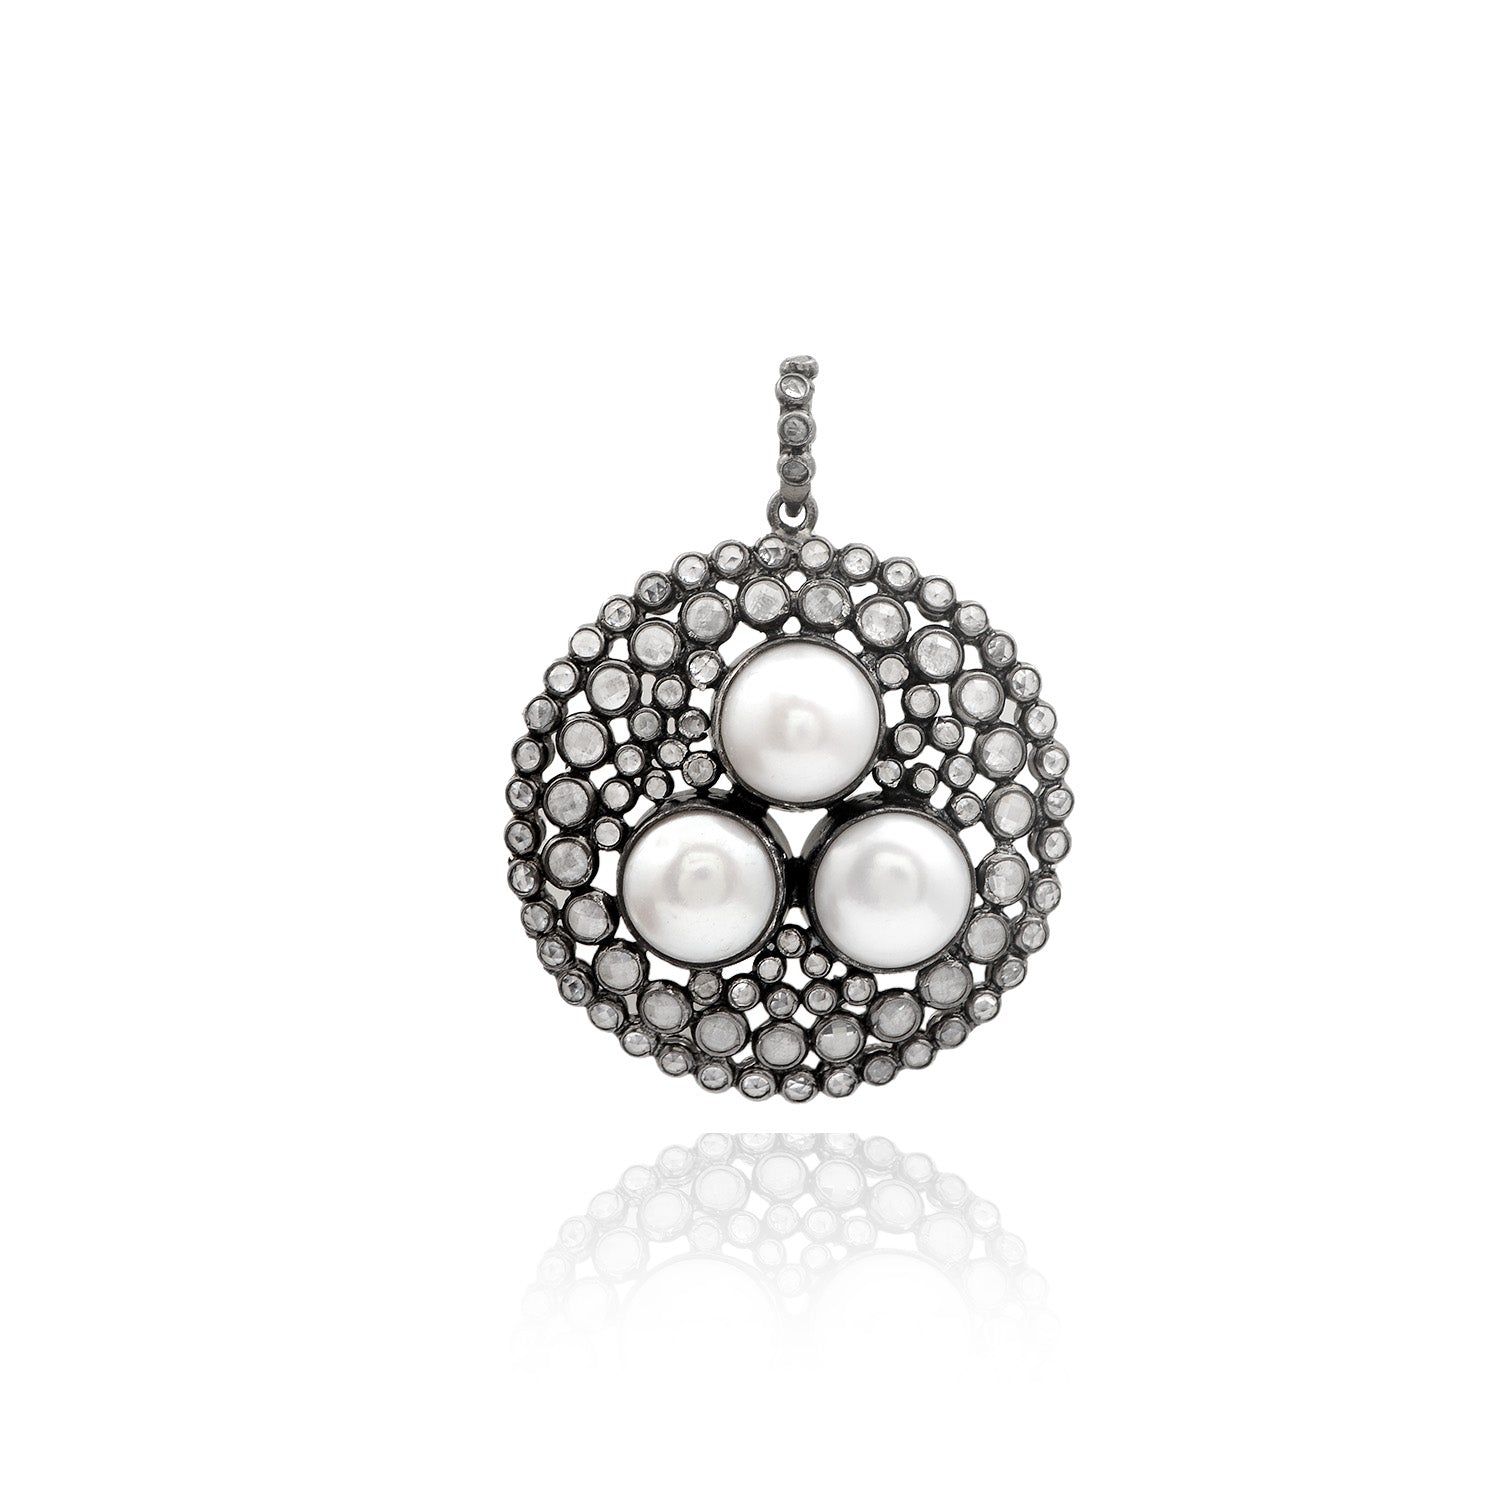 Stunning Silver Pendant with Pearls and white Topaz